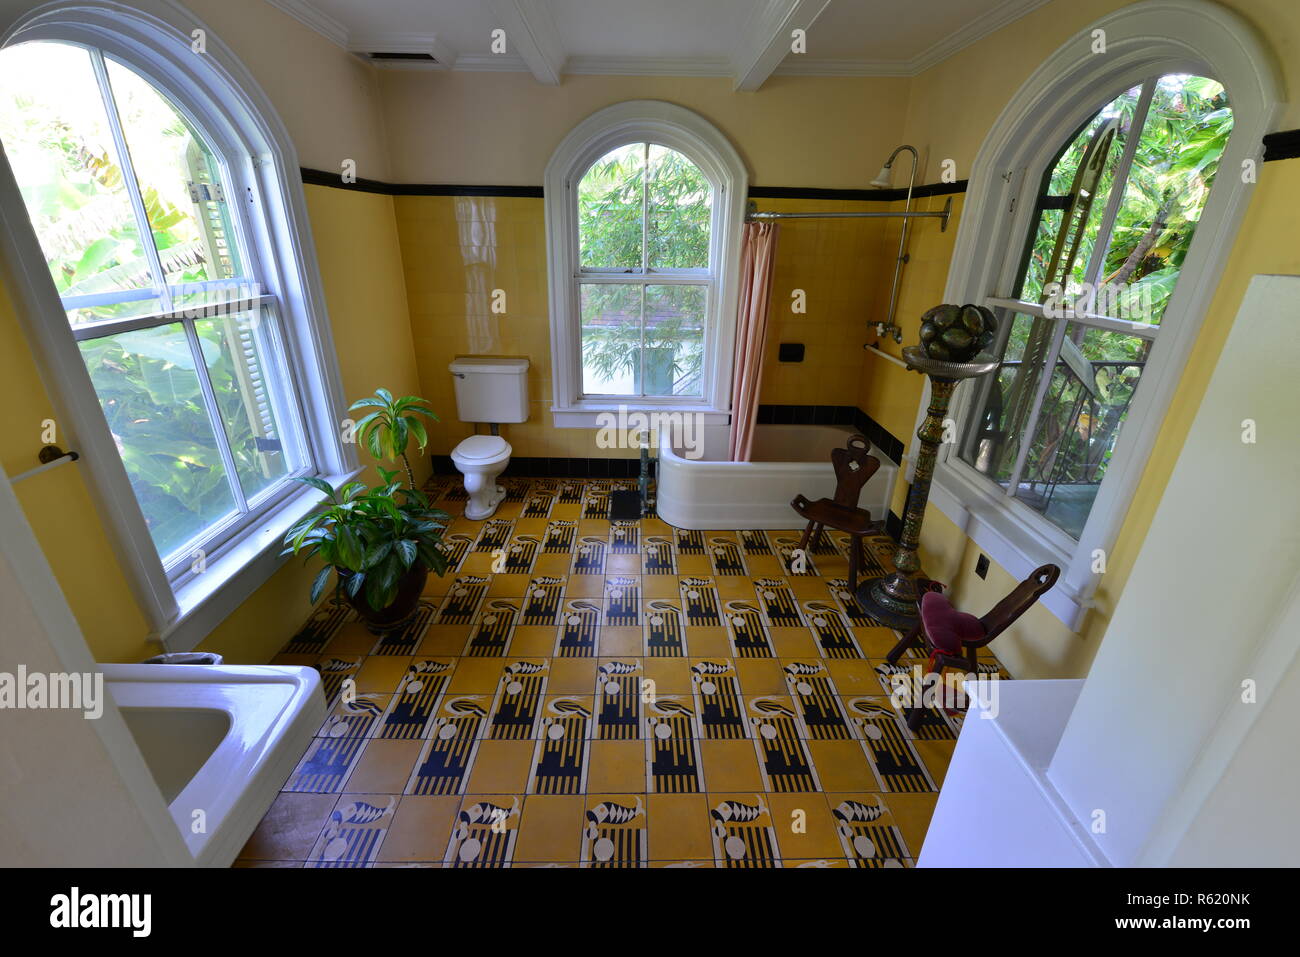 The shower room in Ernest Hemingway's home Stock Photo